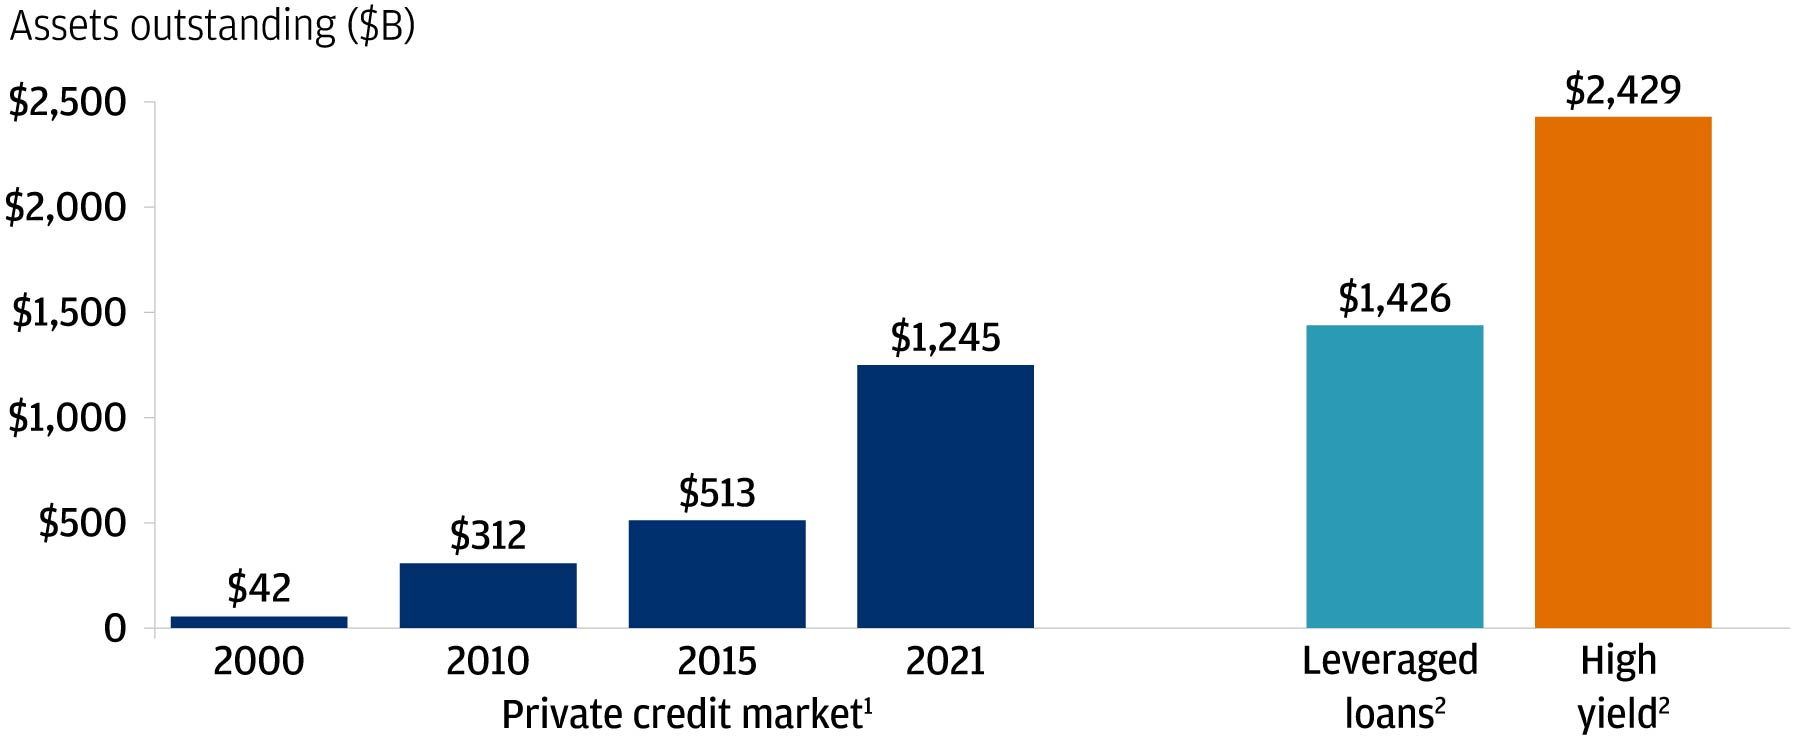 Private credit market is approaching size of the leveraged loan market